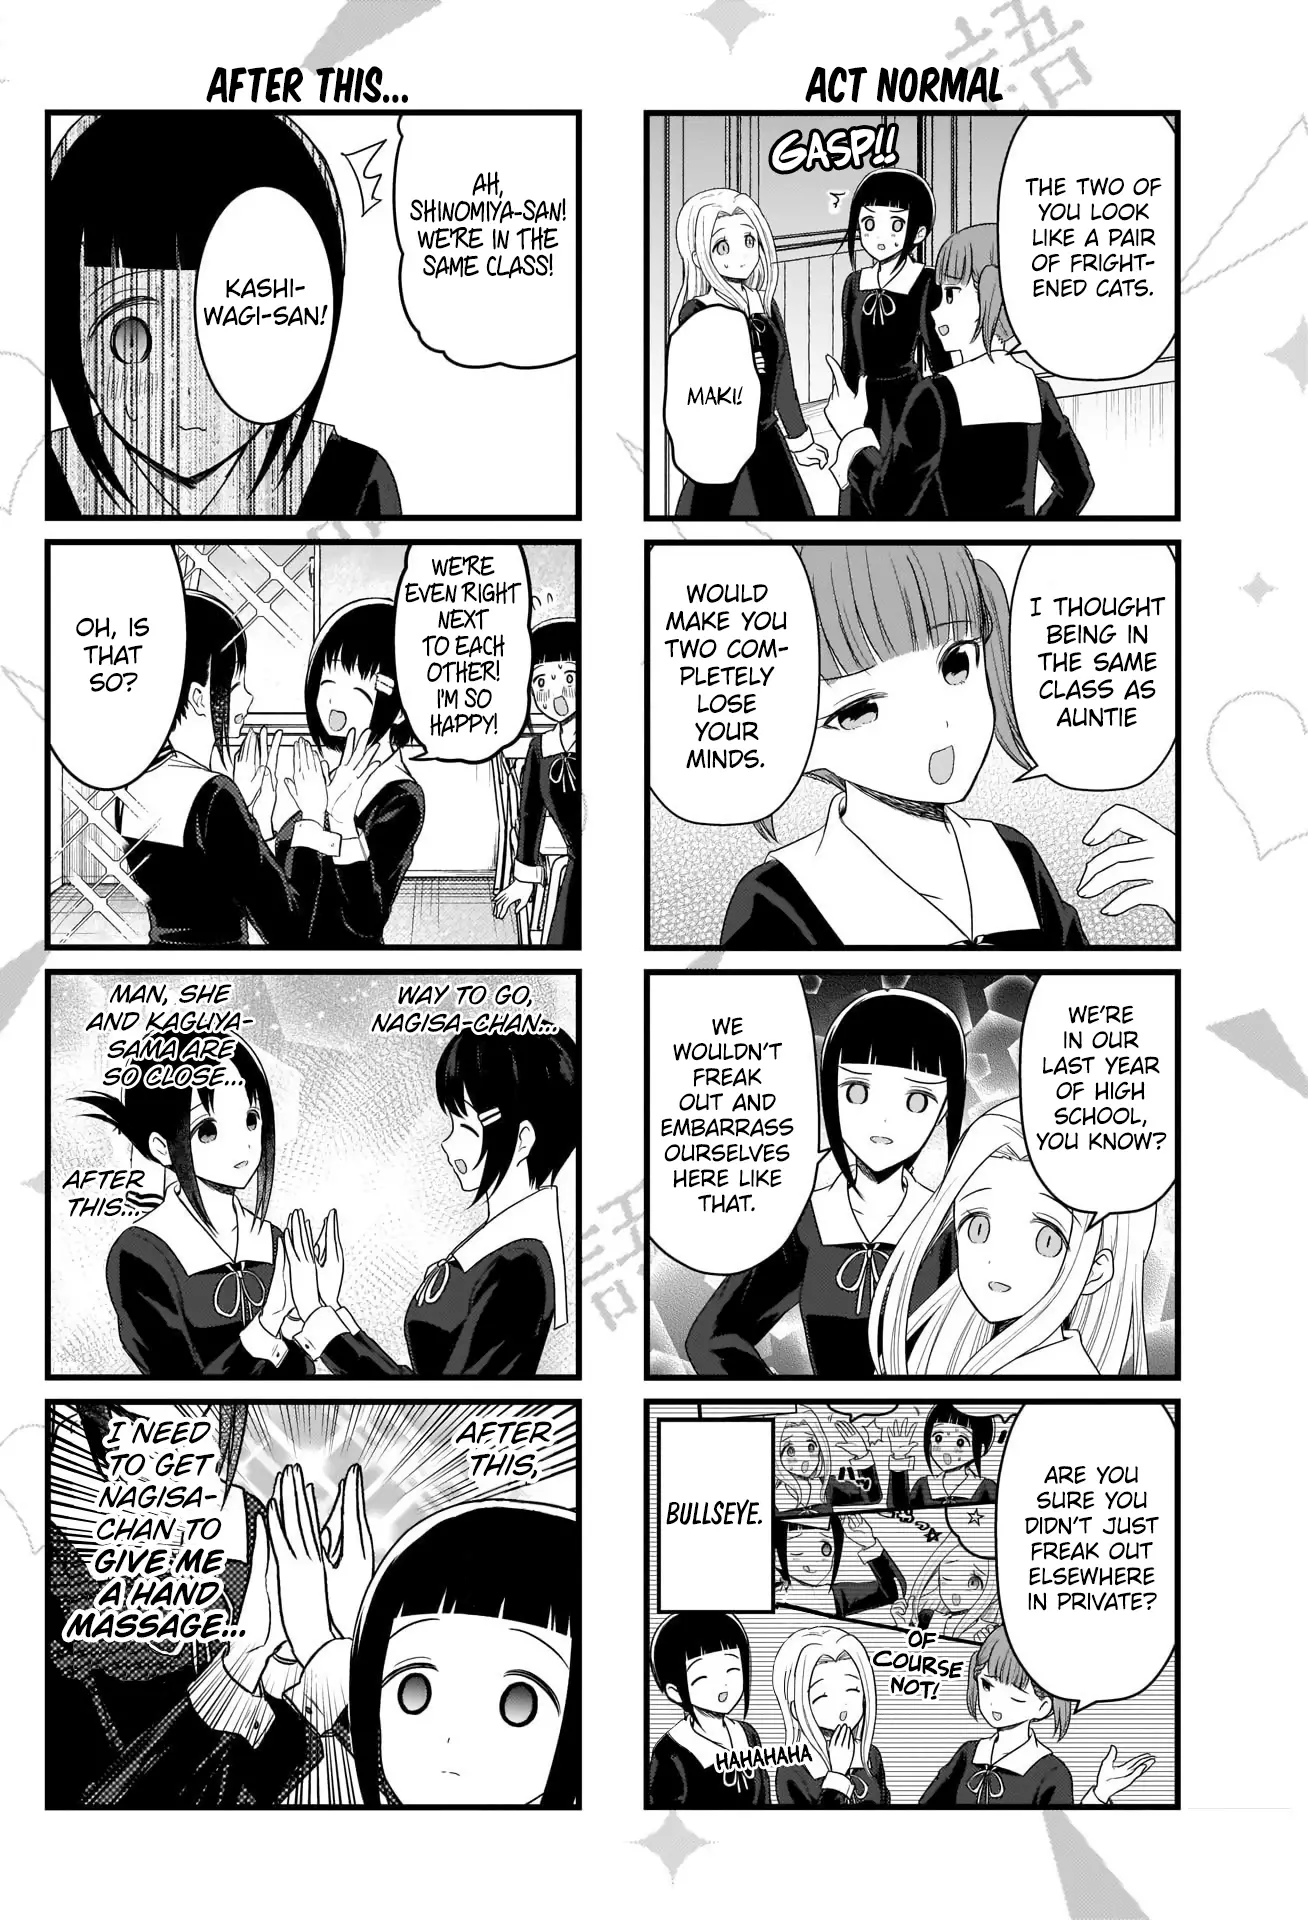 We Want To Talk About Kaguya - 174 page 2-e0e97982